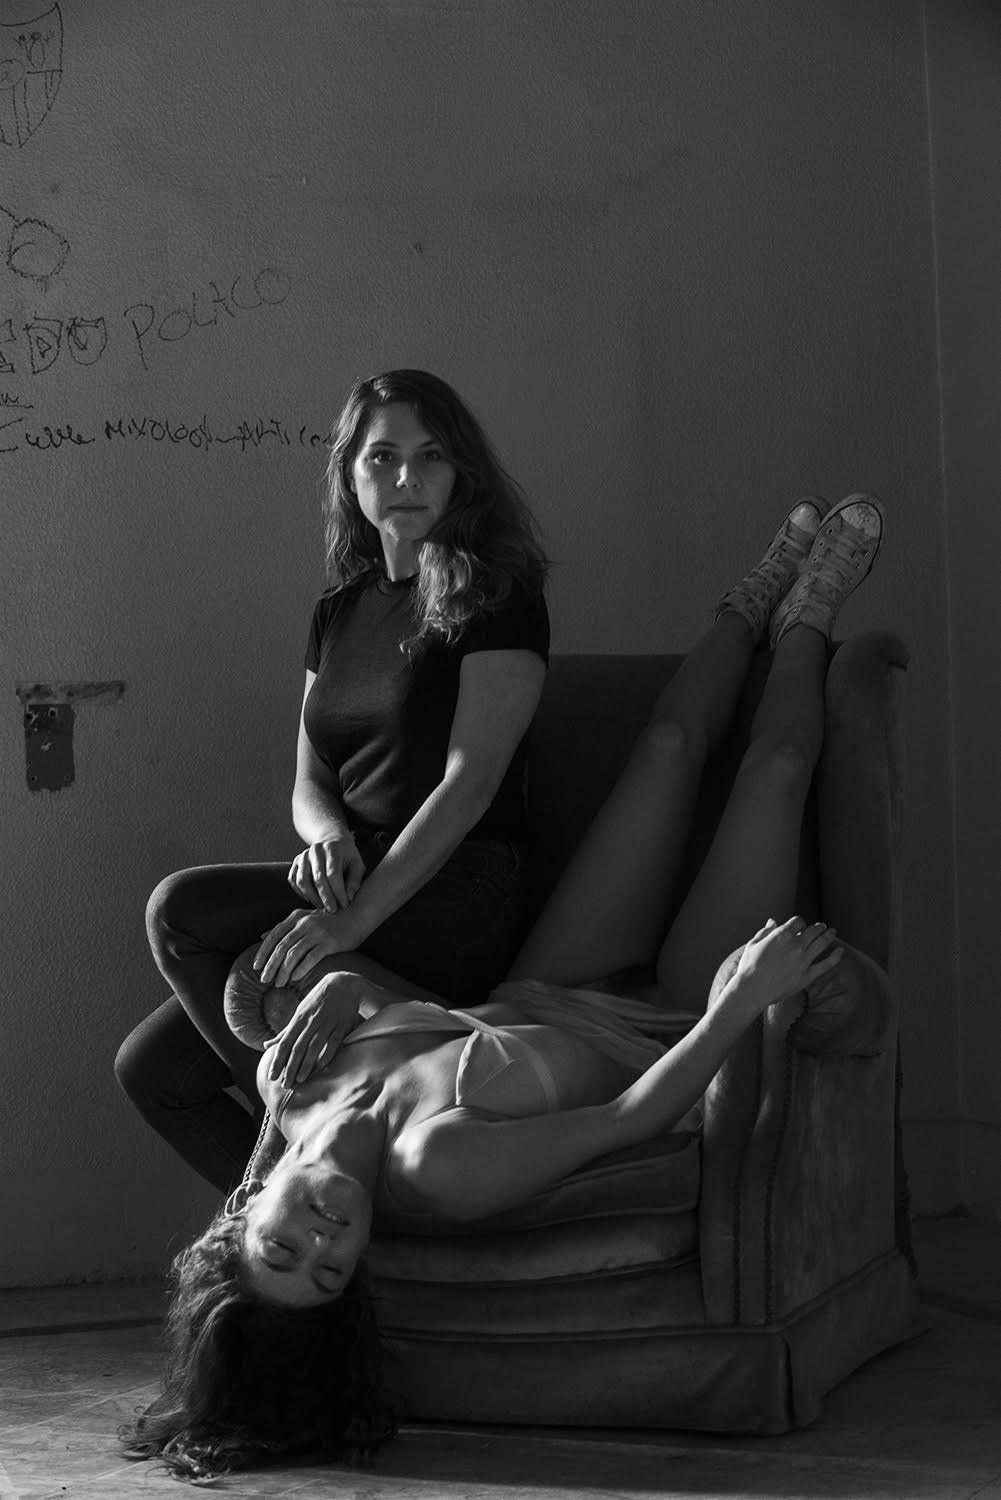 Feminist adult filmmaker Erika Lust pictured with an actress.